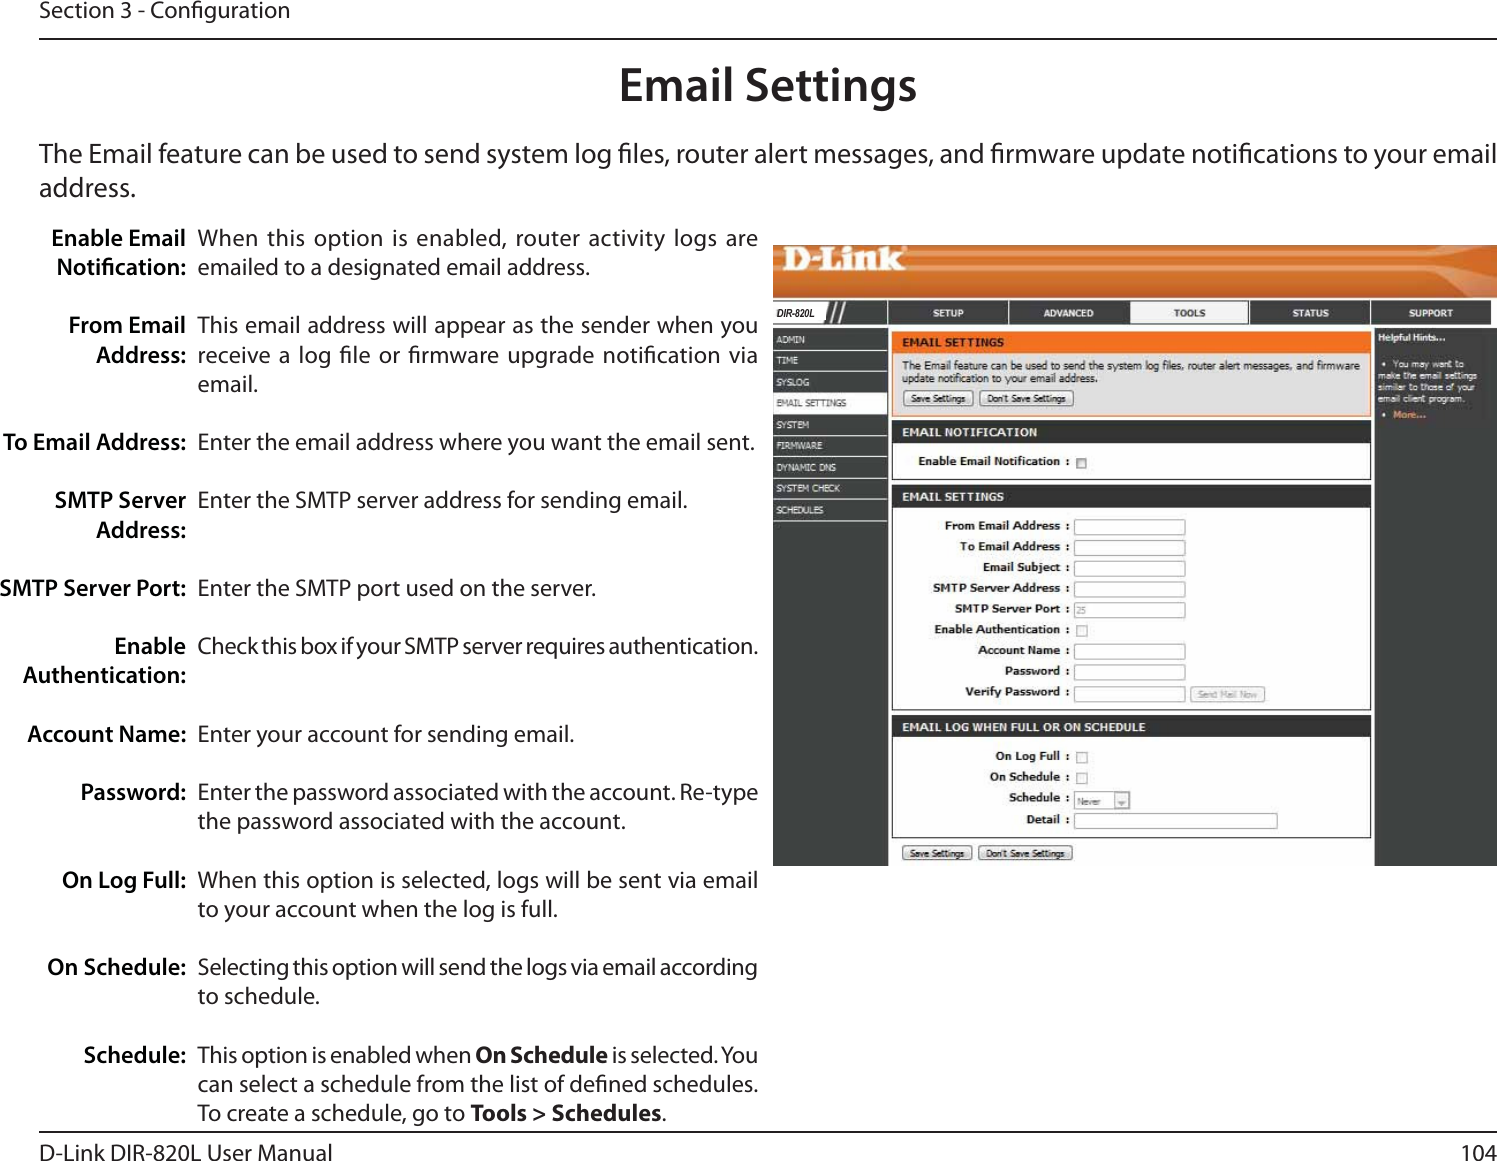 104D-Link DIR-820L User ManualSection 3 - CongurationEmail SettingsThe Email feature can be used to send system log les, router alert messages, and rmware update notications to your email address. Enable Email Notication: From Email Address:To Email Address:SMTP Server Address:SMTP Server Port:Enable Authentication:Account Name:Password:On Log Full:On Schedule:Schedule:When this option is enabled, router activity logs are emailed to a designated email address.This email address will appear as the sender when you receive a log le or rmware upgrade notication via email.Enter the email address where you want the email sent. Enter the SMTP server address for sending email. Enter the SMTP port used on the server.Check this box if your SMTP server requires authentication. Enter your account for sending email.Enter the password associated with the account. Re-type the password associated with the account.When this option is selected, logs will be sent via email to your account when the log is full.Selecting this option will send the logs via email according to schedule.This option is enabled when On Schedule is selected. You can select a schedule from the list of dened schedules. To create a schedule, go to Tools &gt; Schedules.&apos;,5/